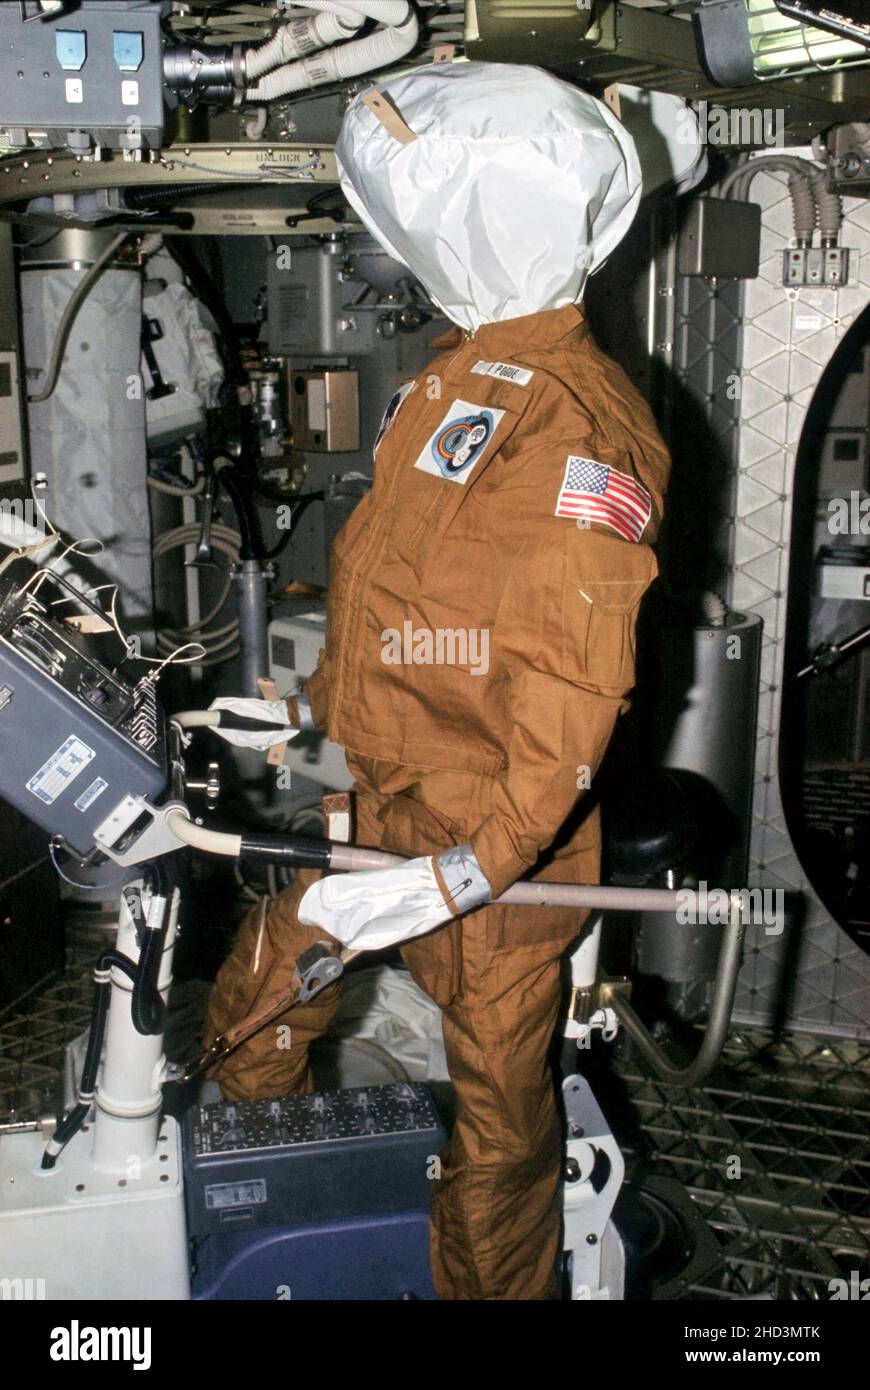 (July-September 1973) --- This photograph is an illustration of the humorous side of the Skylab 3 crew. This dummy was left behind in the Skylab space station by the Skylab 3 crew to be found by the Skylab 4 crew. The dummy is dressed in a flight suit and propped upon the bicycle ergometer. The name tag indicated that it represents William R. Pogue, Skylab pilot. The dummy for Gerald P. Carr, Skylab 4 commander, was placed in the Lower Body Negative Pressure Device. The dummy representing Edward G. Gibson was left in the waste compartment. Astronauts Alan L. Bean, Owen K. Garriott and Jack R. Stock Photo